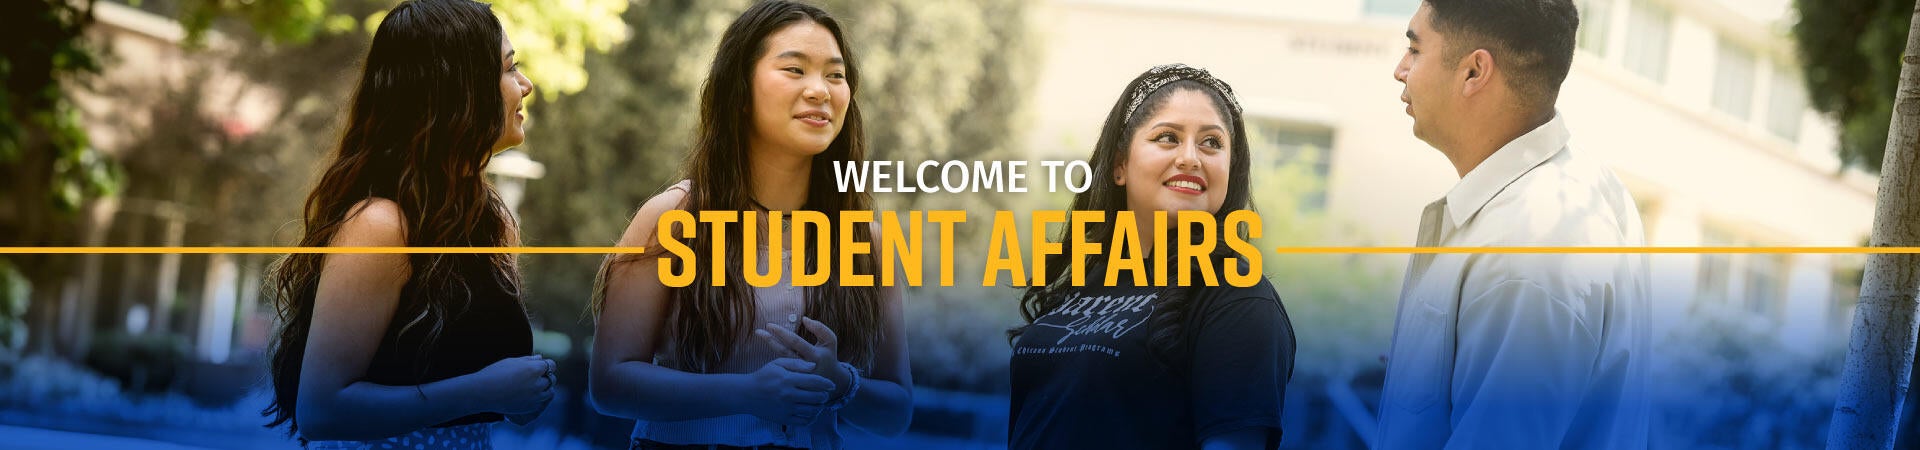 A header image that says "Student Affairs" with a picture of some students smiling.